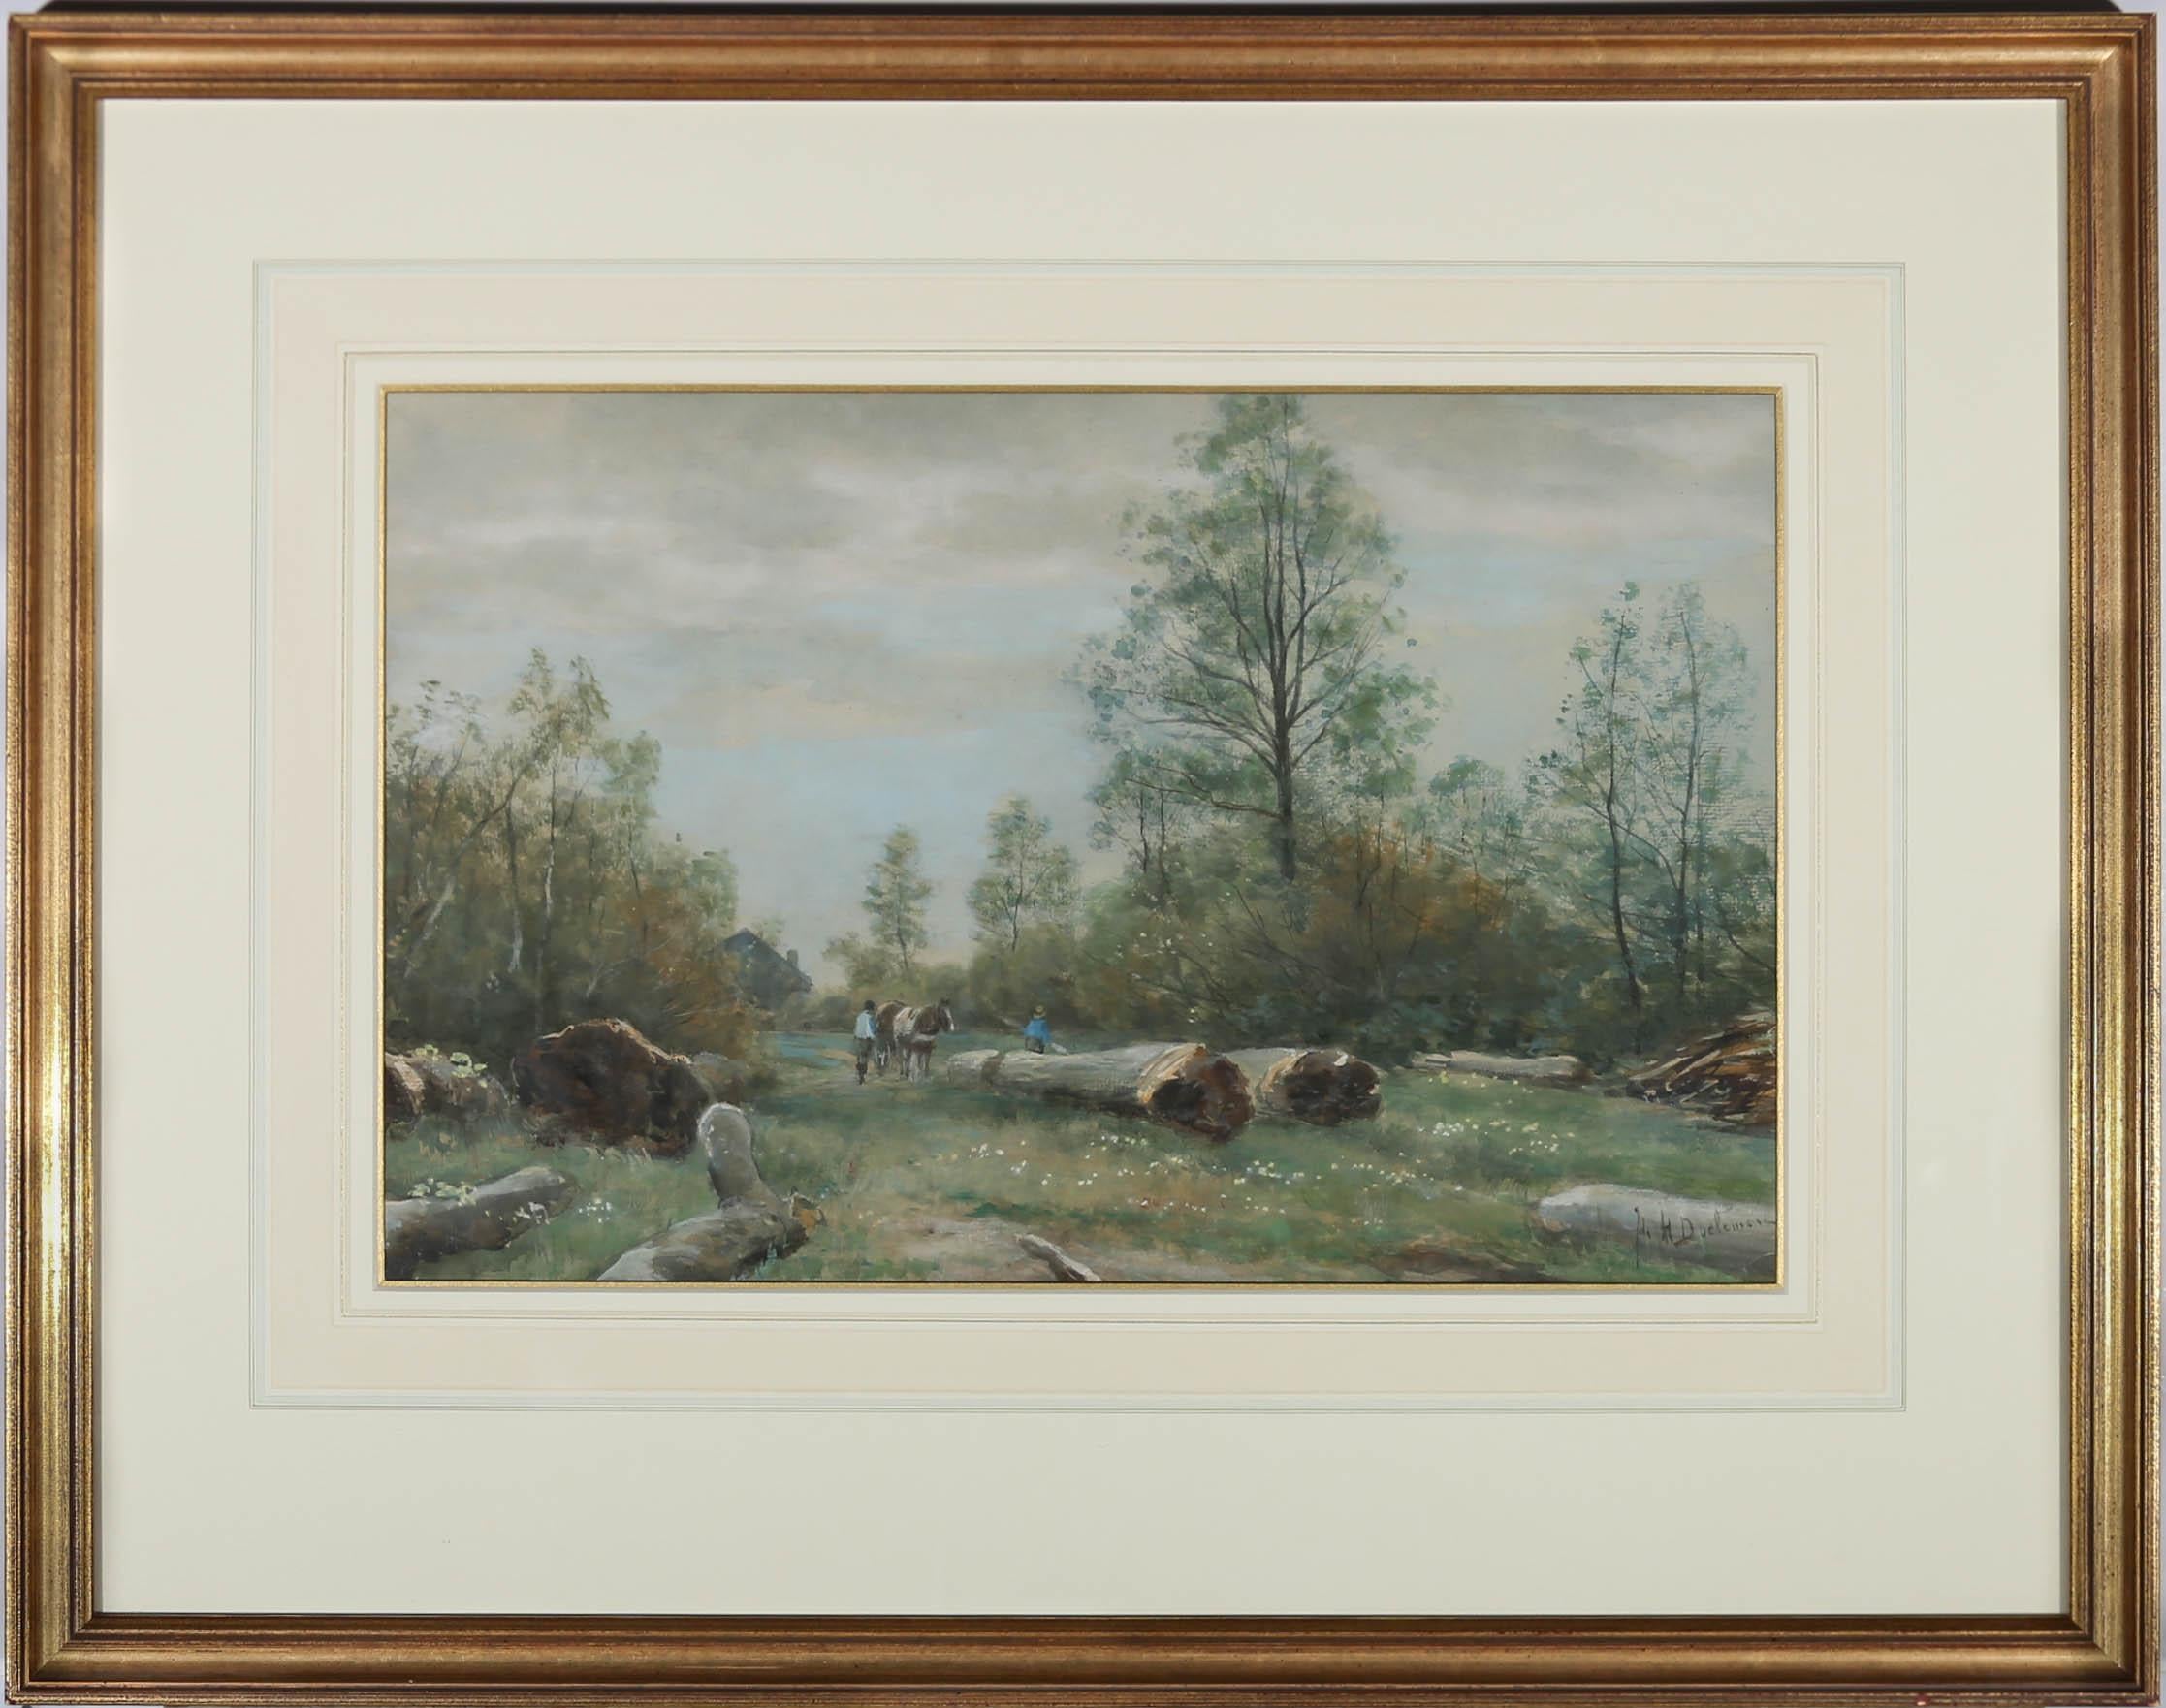 A fine rural watercolour showing men hard at work in a clearing, preparing to turn heavy trunks into timber for raw material. The painting is signed by the artist to the lower right. Elegantly presented in a wash-line mount and contemporary gilt